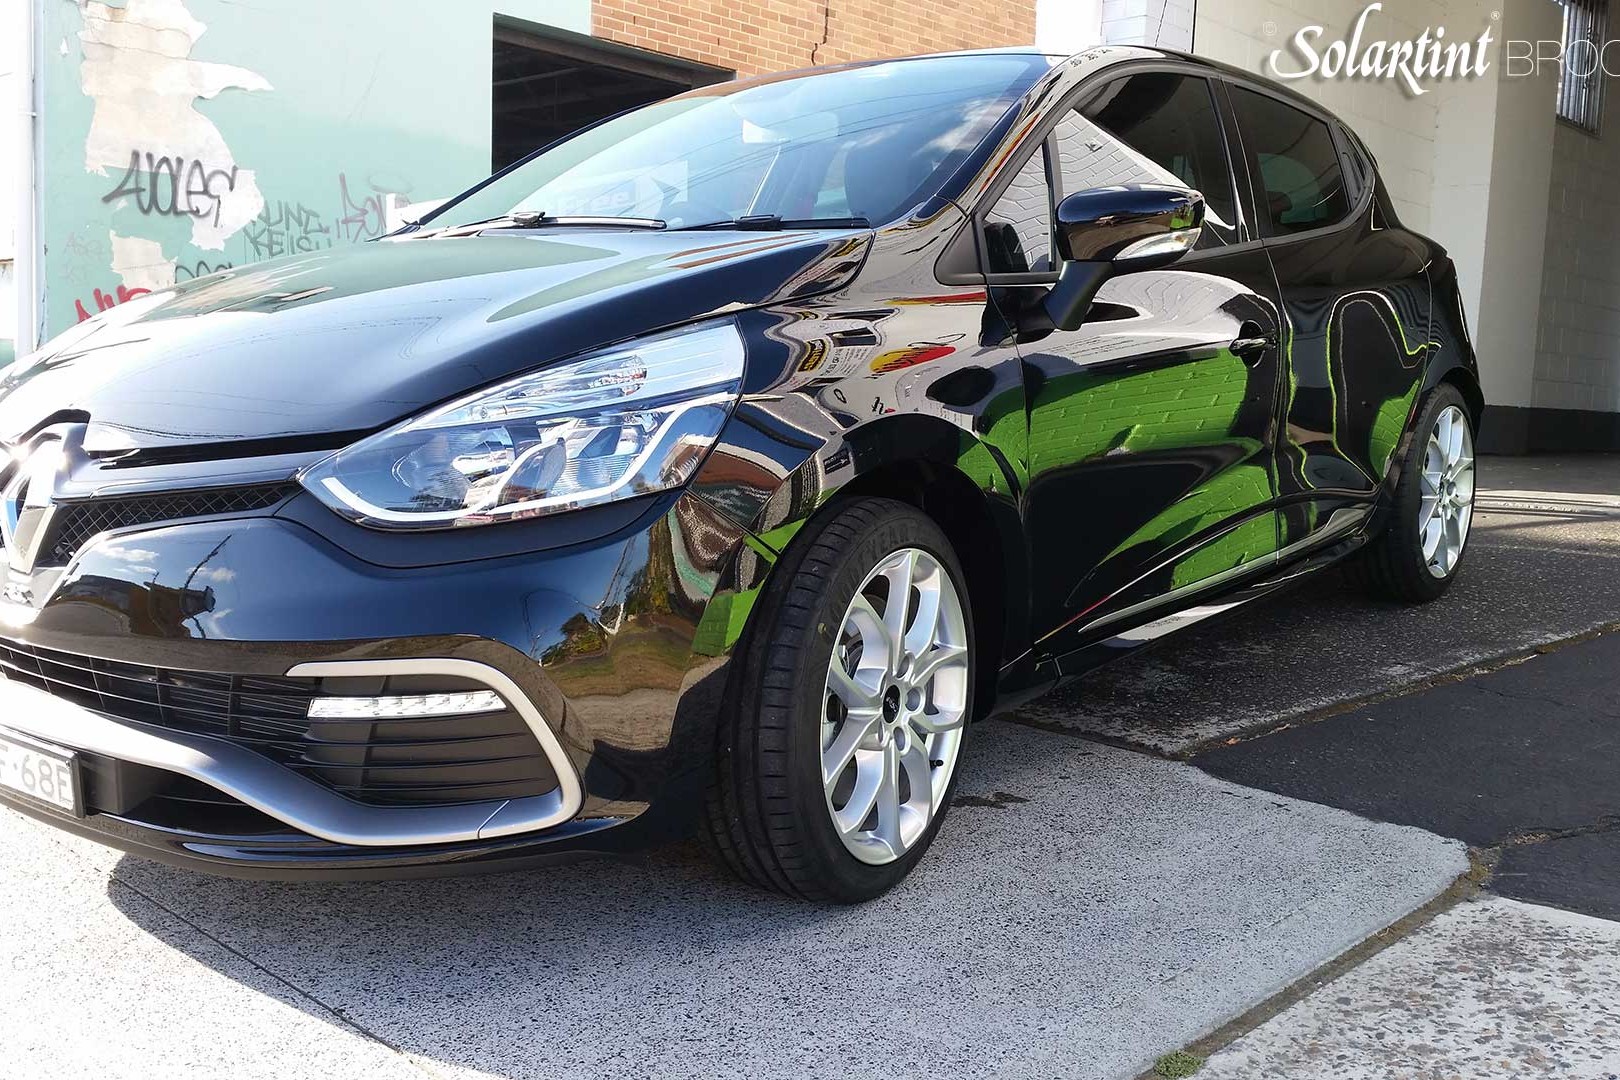 9 hours labour in paint correction, another half day for coating & tint, this Clio Sport reborn and nearly spilled out the driveway like it should have been!